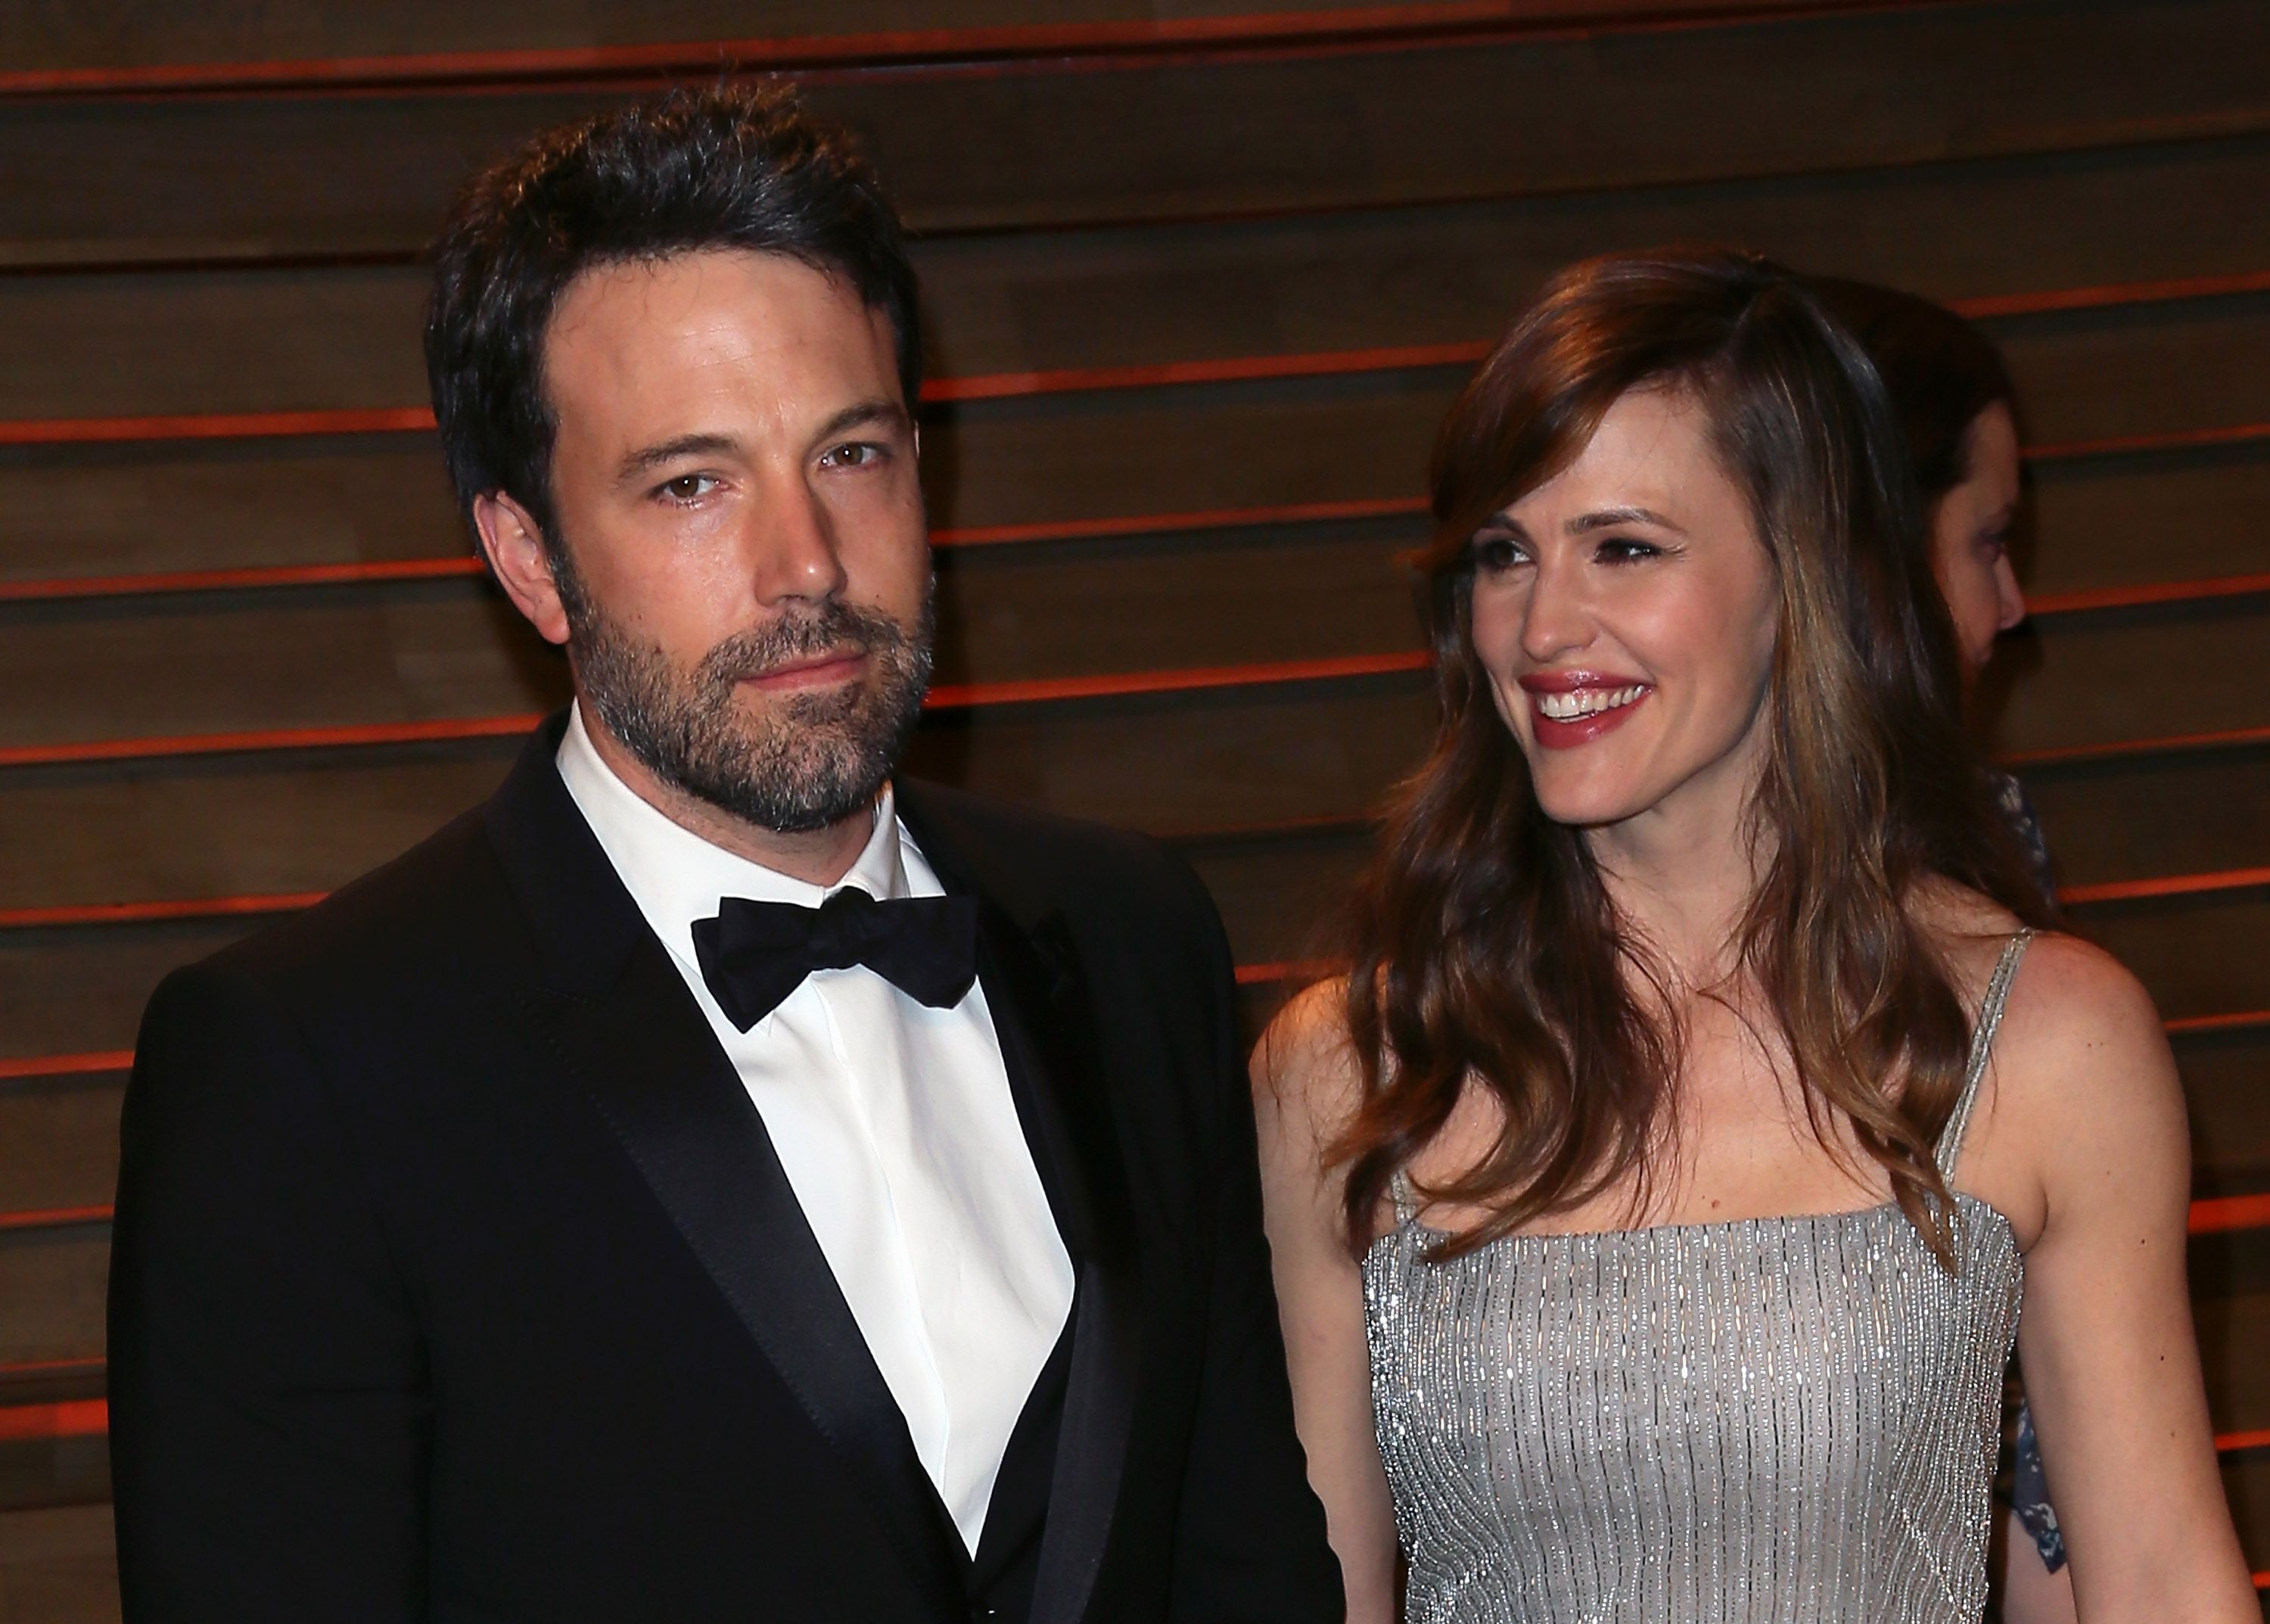 Ben Affleck and Jennifer Garner attend the 2014 Vanity Fair Oscar Party hosted by Graydon Carter on March 2, 2014. | Photo: Getty Images